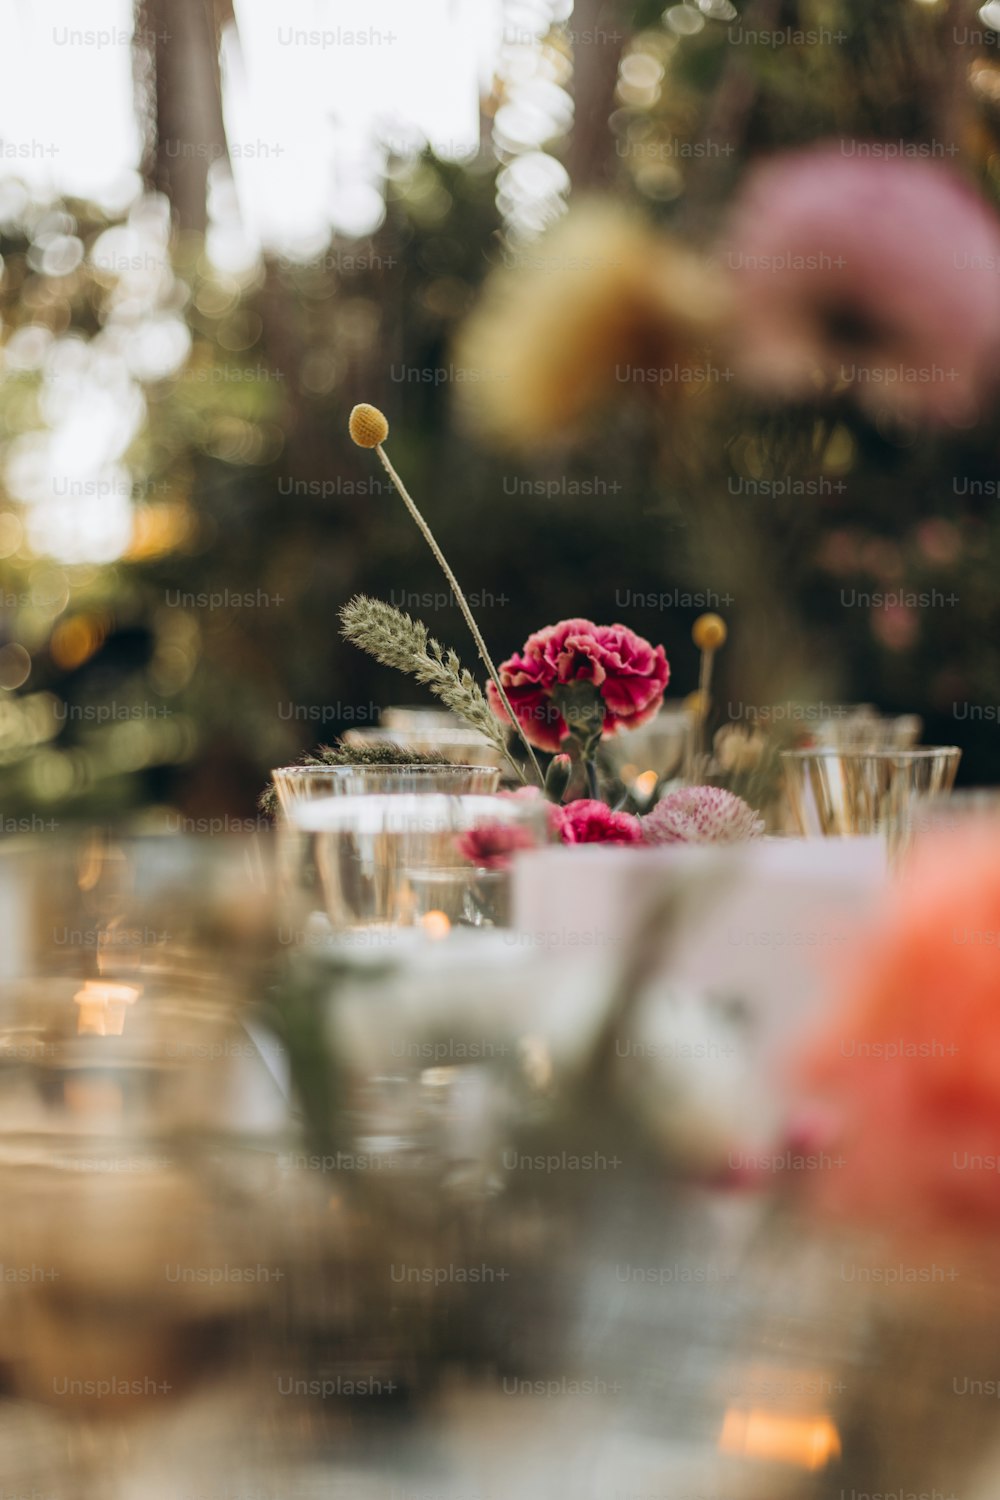 a close up of a table with glasses and flowers